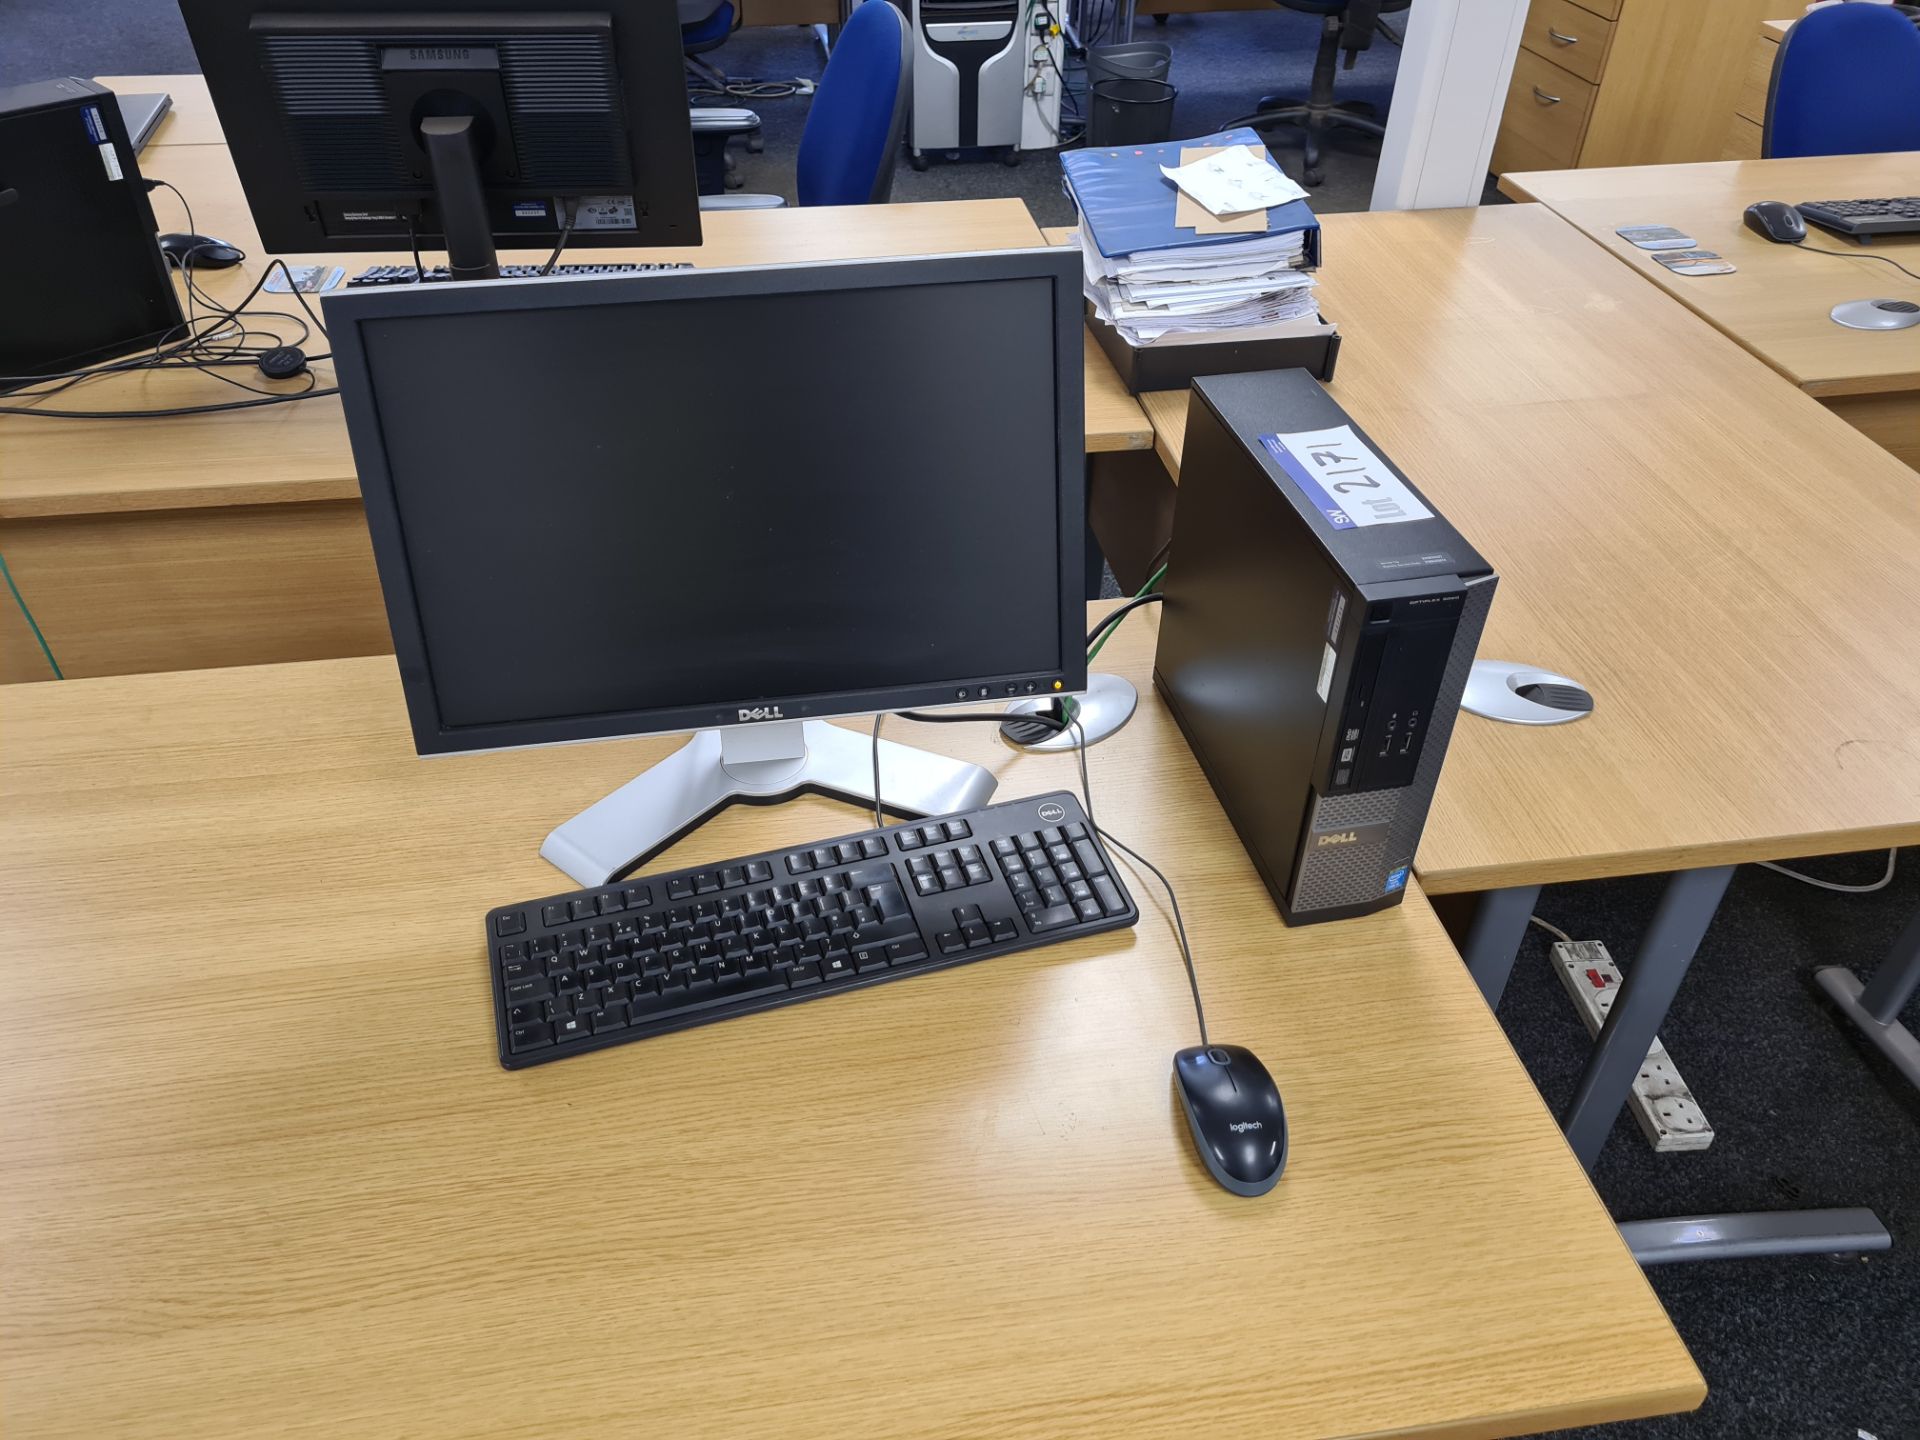 Two Dell OptiPlex 3020 Desktop Personal Computers (hard disk removed or wiped), with two monitors,